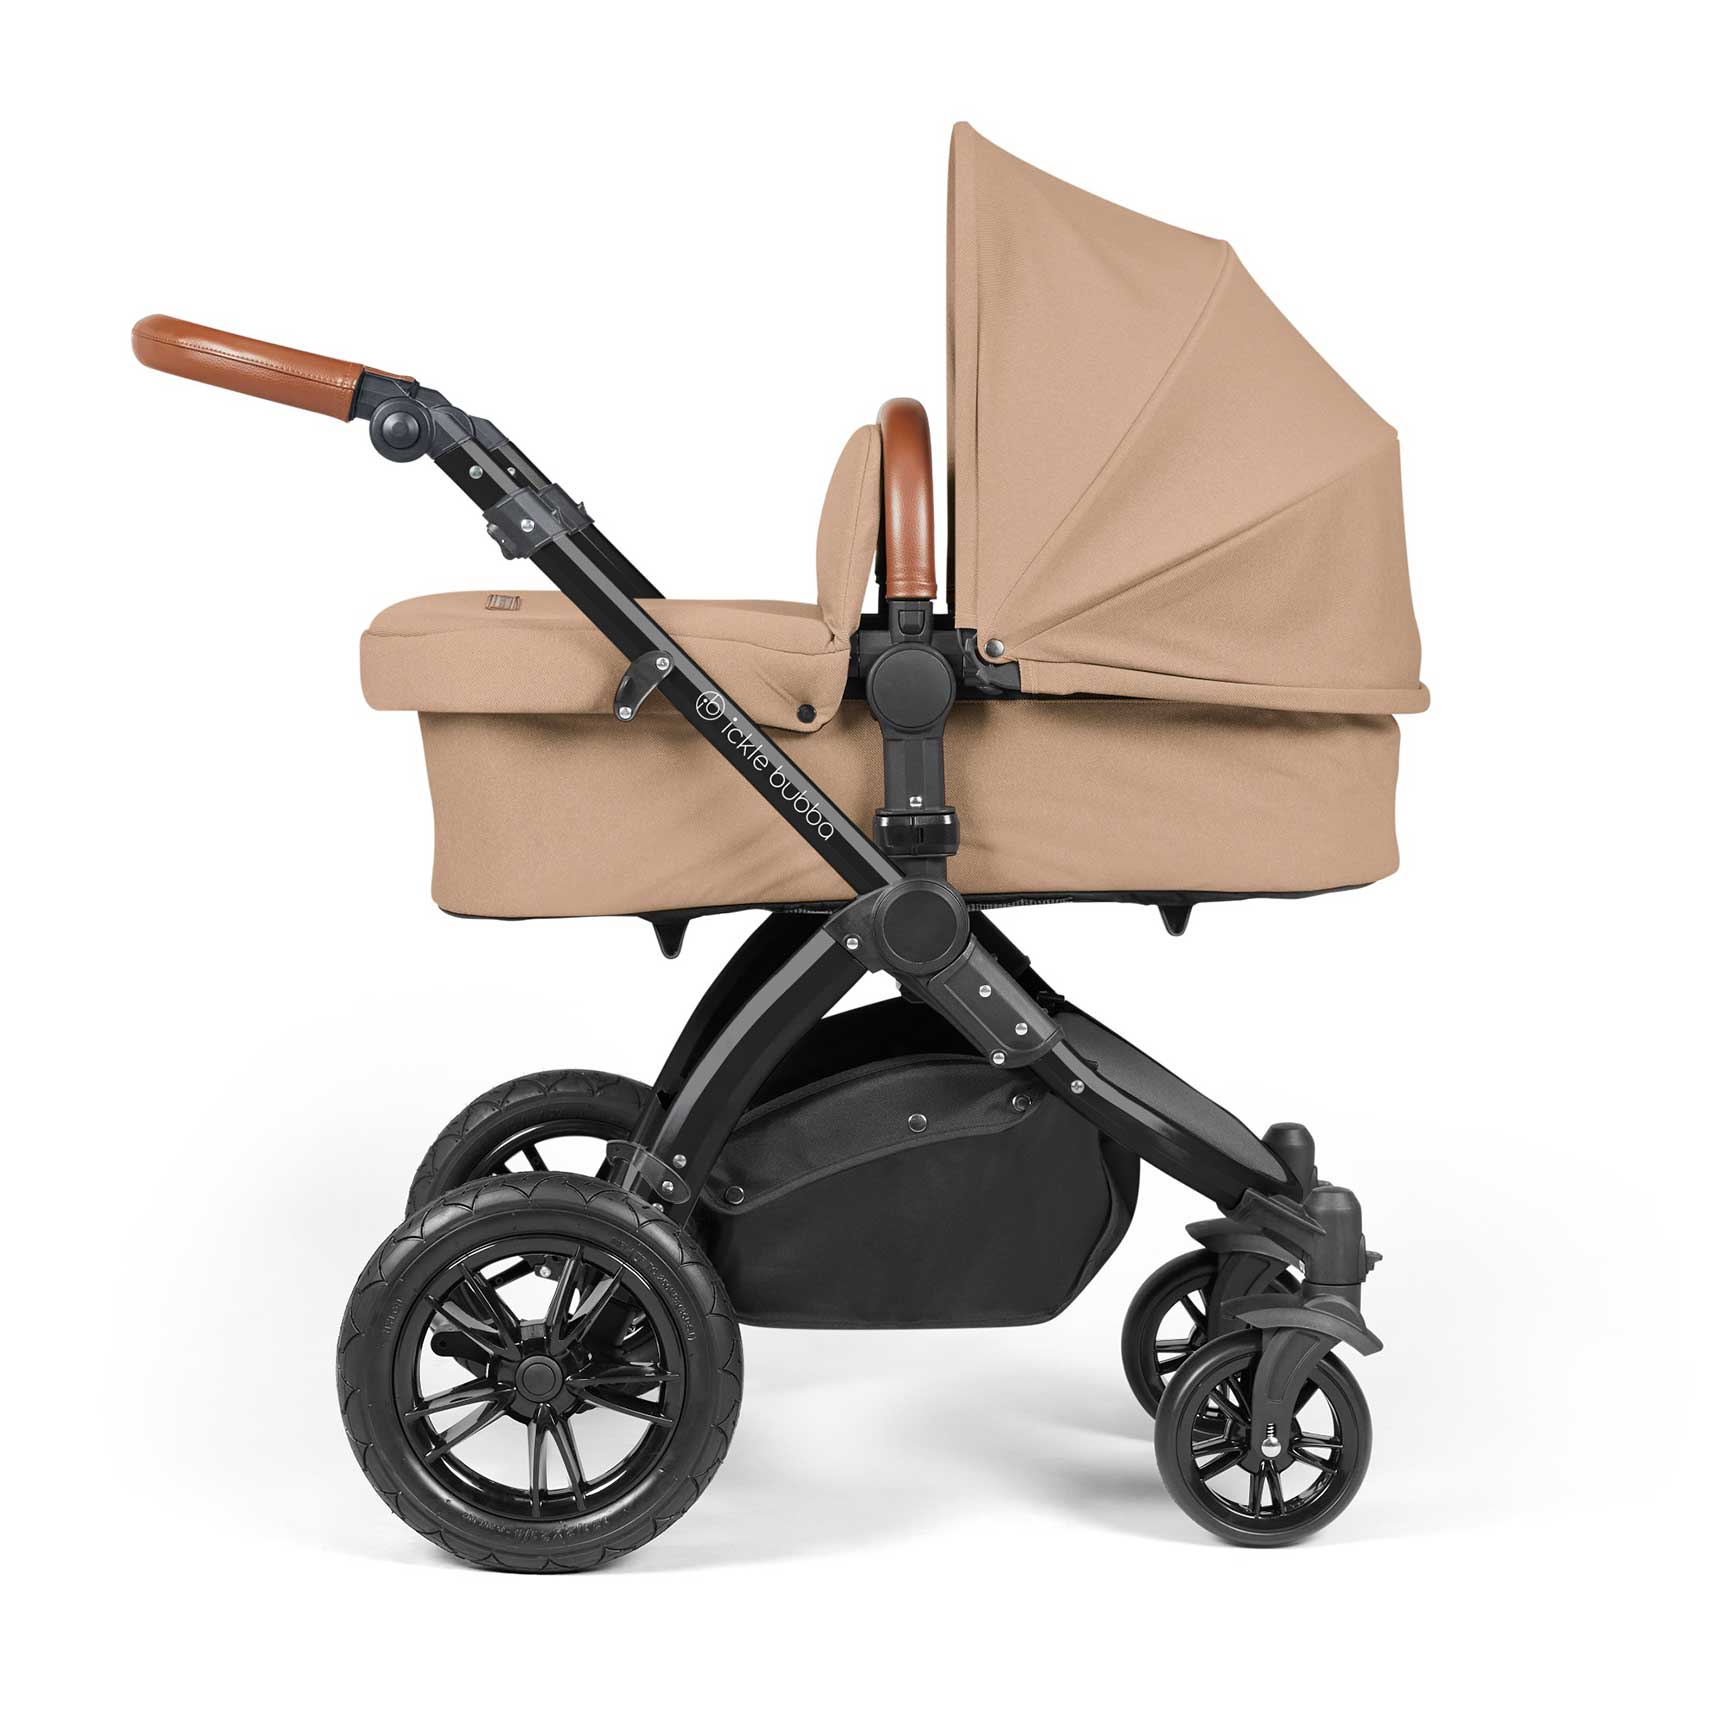 Ickle Bubba Stomp Luxe 2-in-1 Plus Pushchair & Carrycot in Black/Desert/Tan Travel Systems 10-003-001-209 5056515026245